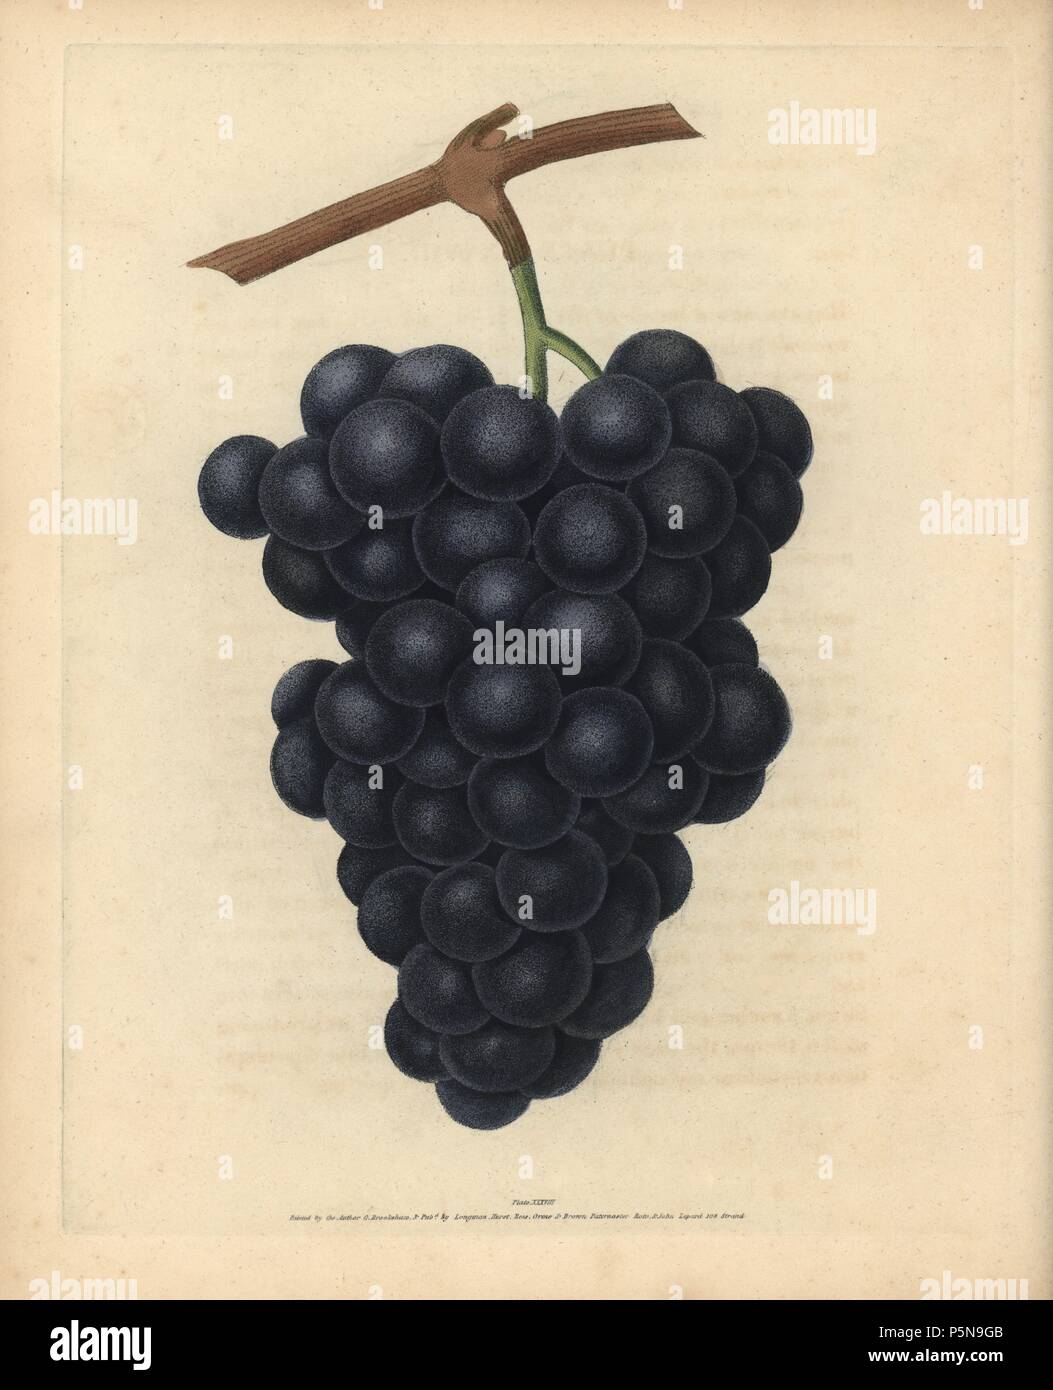 Black Hamburgh grapes, Vitis vinifera. Handcoloured stipple engraving of an illustration by George Brookshaw from his own 'Pomona Britannica,' London, Longman, Hurst, etc., 1817. The quarto edition of the original folio edition published from 1804-1812. Brookshaw (1751-1823) was a successful cabinet maker who disappeared in the 1790s before returning as a flower painter with the anonymous 'New Treatise on Flower Painting,' 1797. Stock Photo